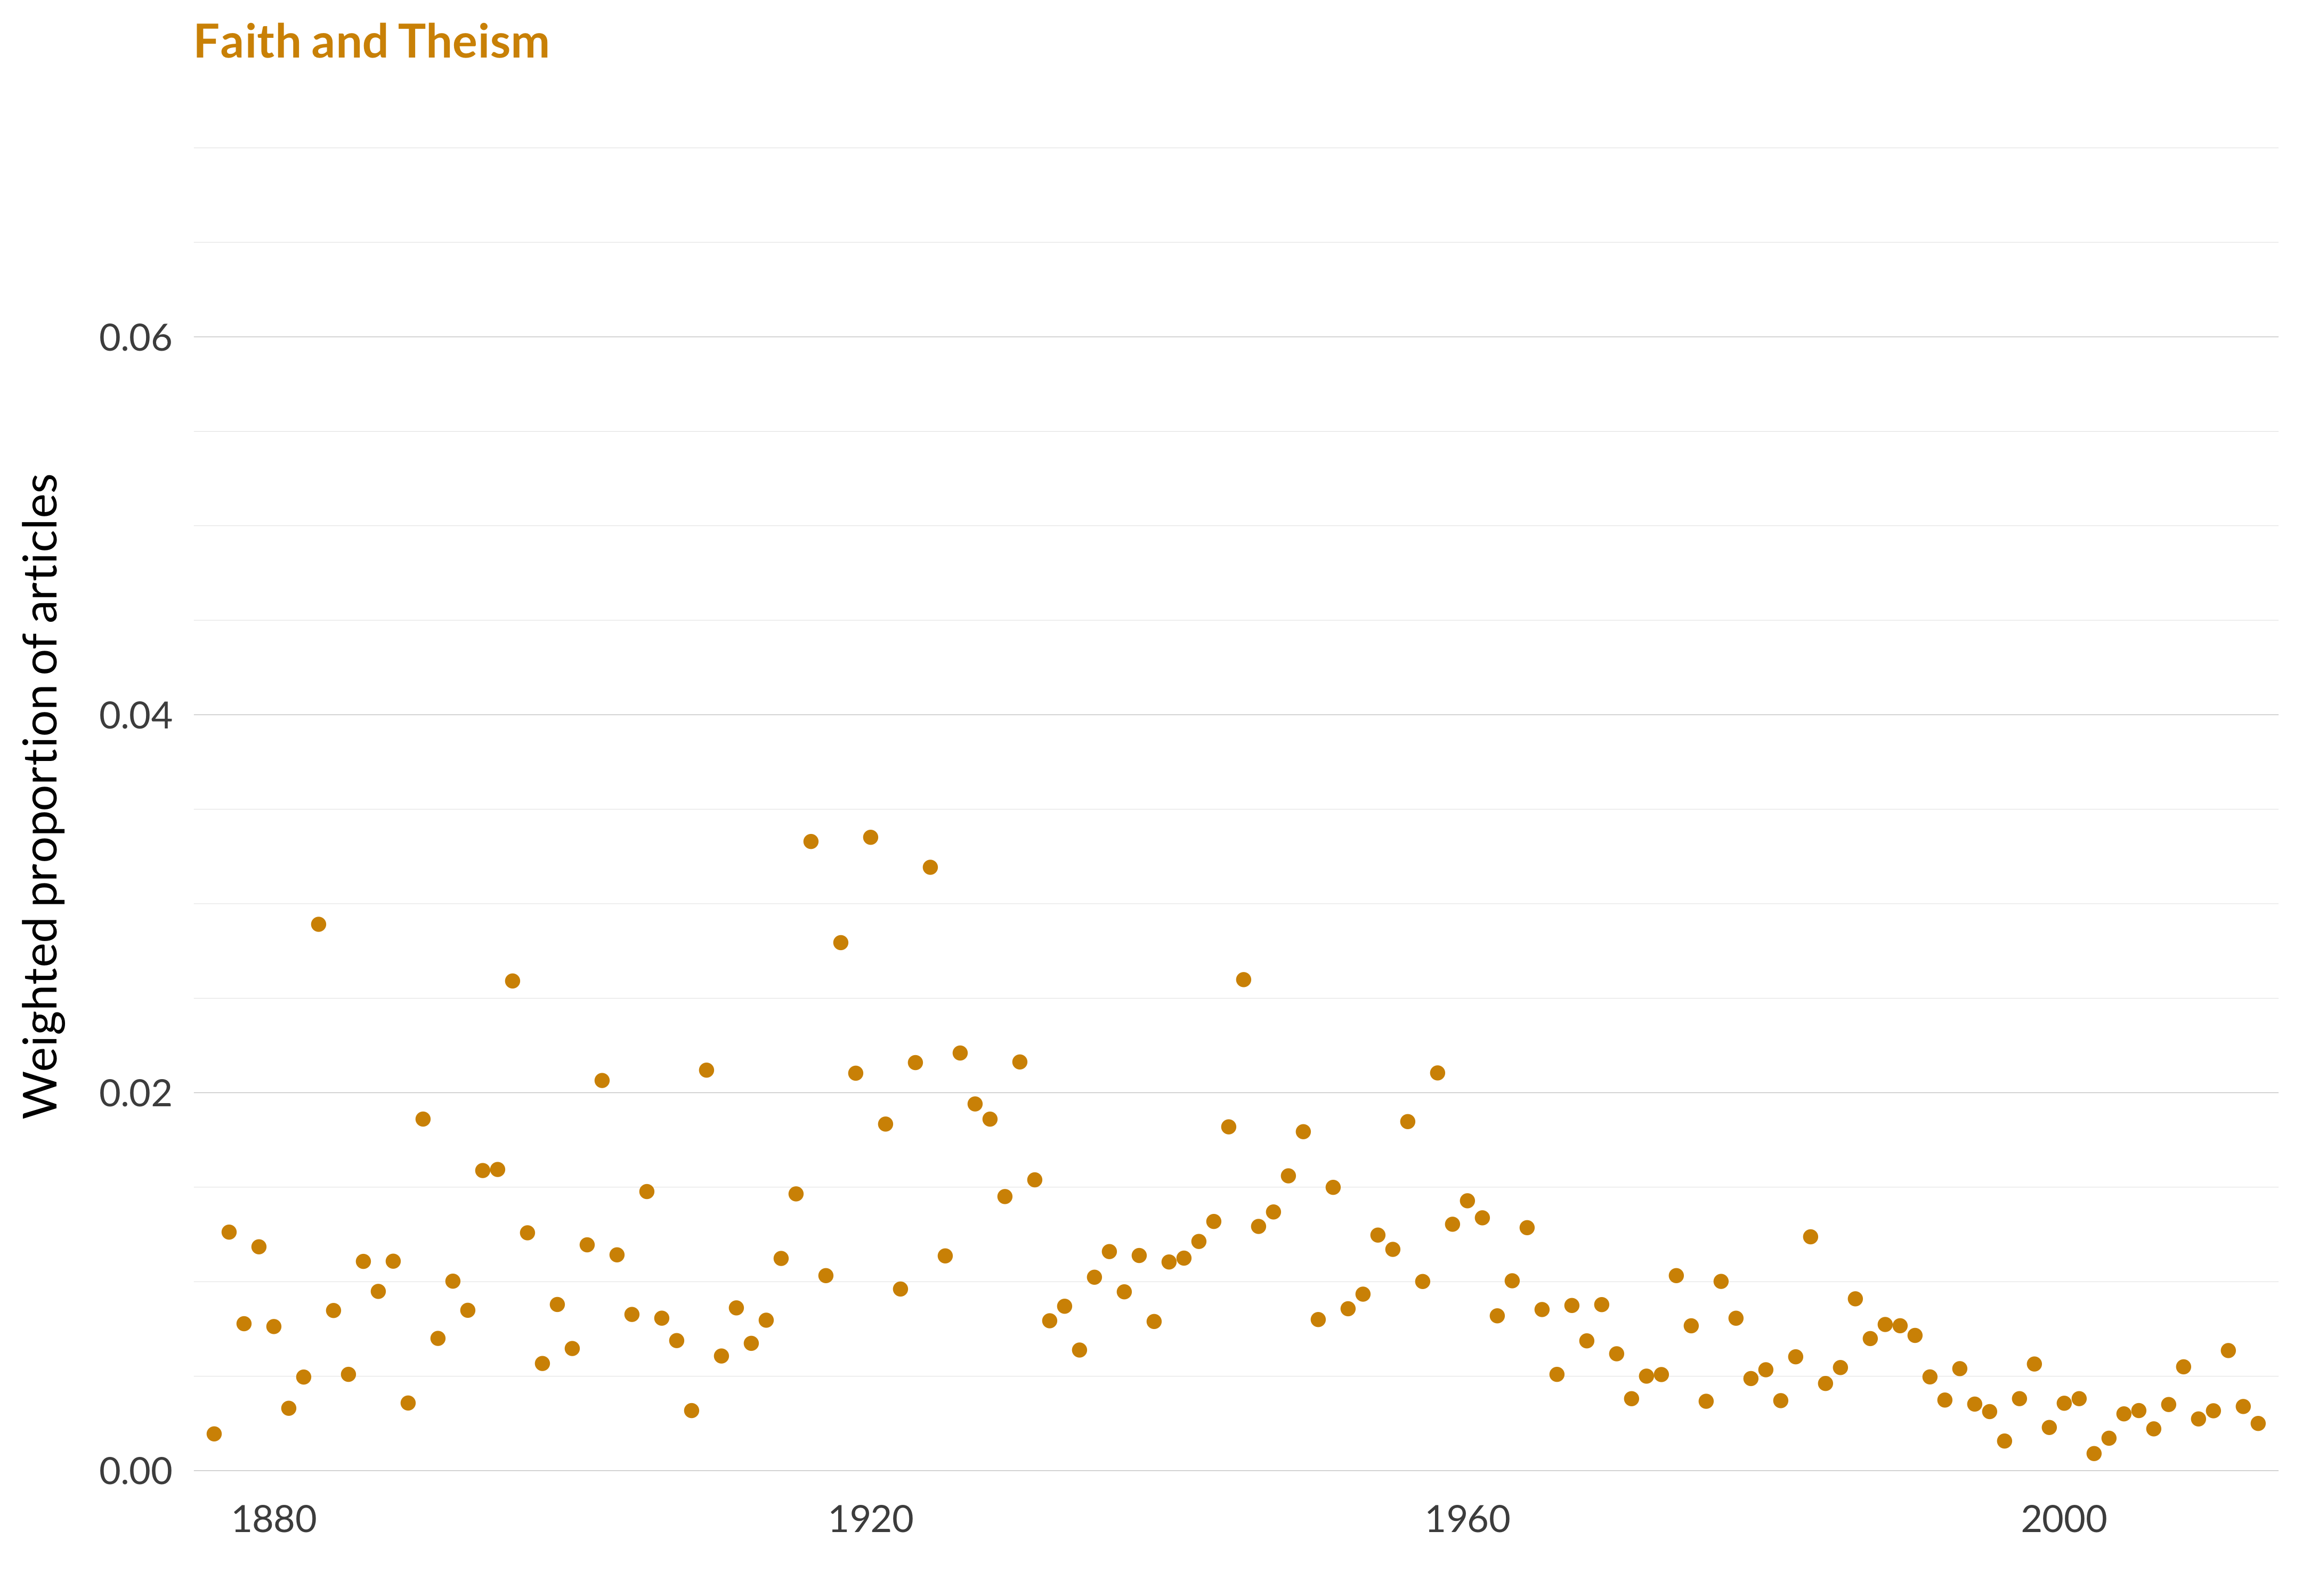 A scatterplot showing which proportion of articles each year are in the faith and theismtopic. The x-axis shows the year, the y-axis measures the proportion of articles each year in this topic. There is one dot per year. The highest value is in 1920 when 3.4% of articles were in this topic. The lowest value is in 2002 when 0.1% of articles were in this topic. The full table that provides the data for this graph is available in Table A.11 in Appendix A.